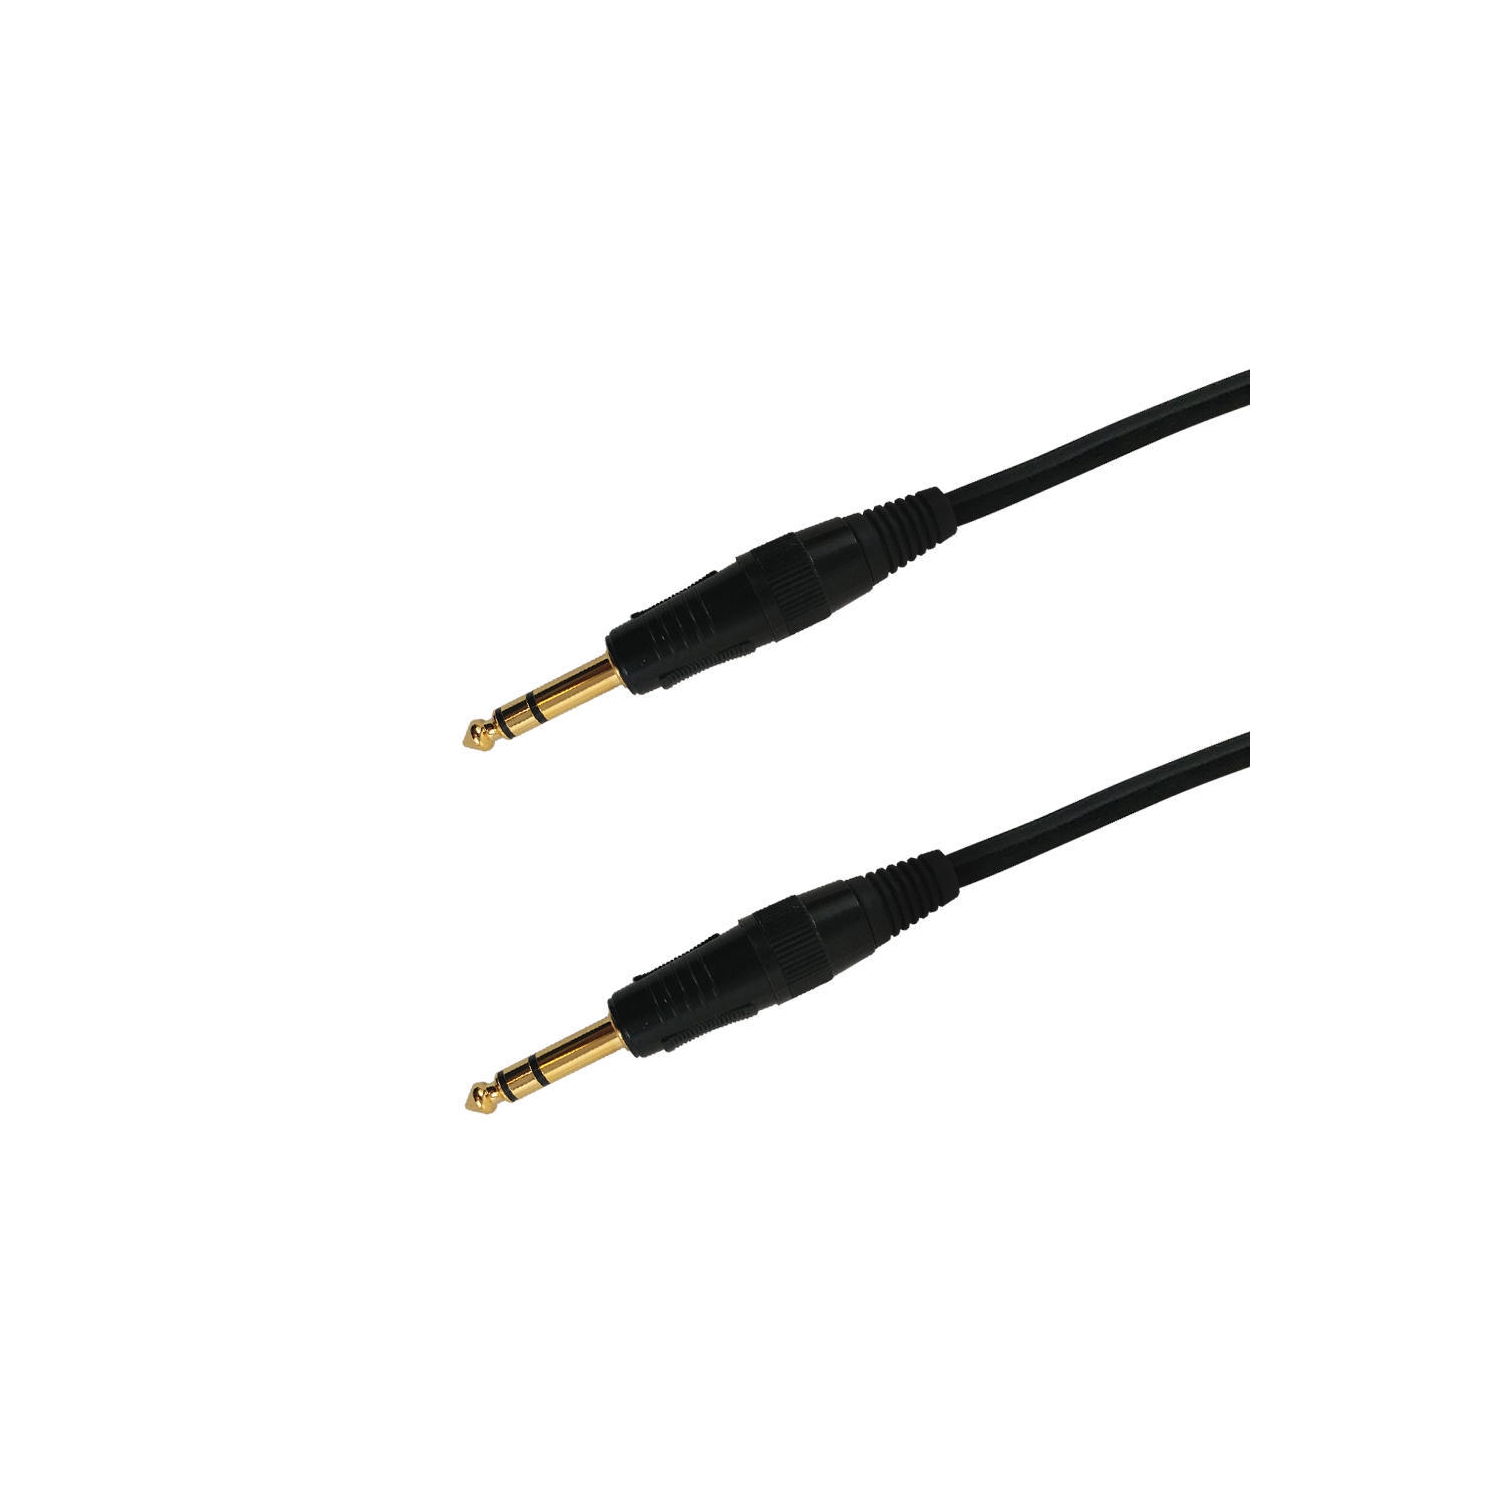 HYfai 10ft 3m 1/4’’ 1/4 Inch TRS 6.35mm M/M Balanced Stereo Audio Cable for Studio Monitors,Mixer,Yamaha Speaker/Receiver